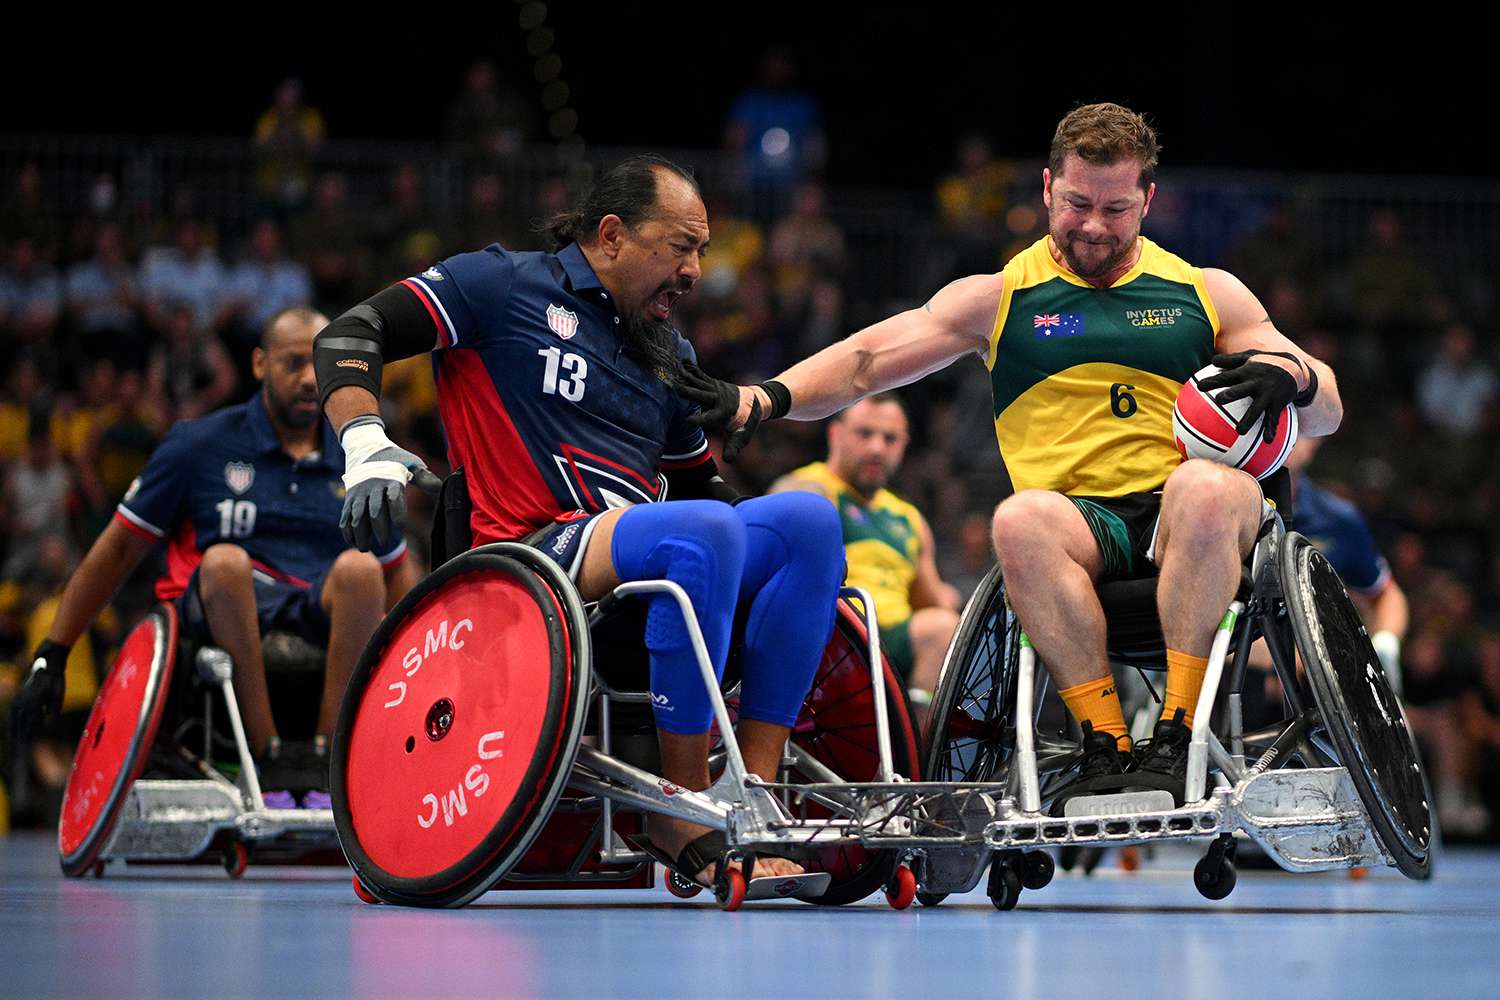 Garrett Kuwada of Team United States challenges Kurt Ludke of Team Australia for the ball in the Mixed Team Semi Final match between Team United States and Team Australia during day two of the Invictus Games 2023 on September 11, 2023 in Duesseldorf, Germany.